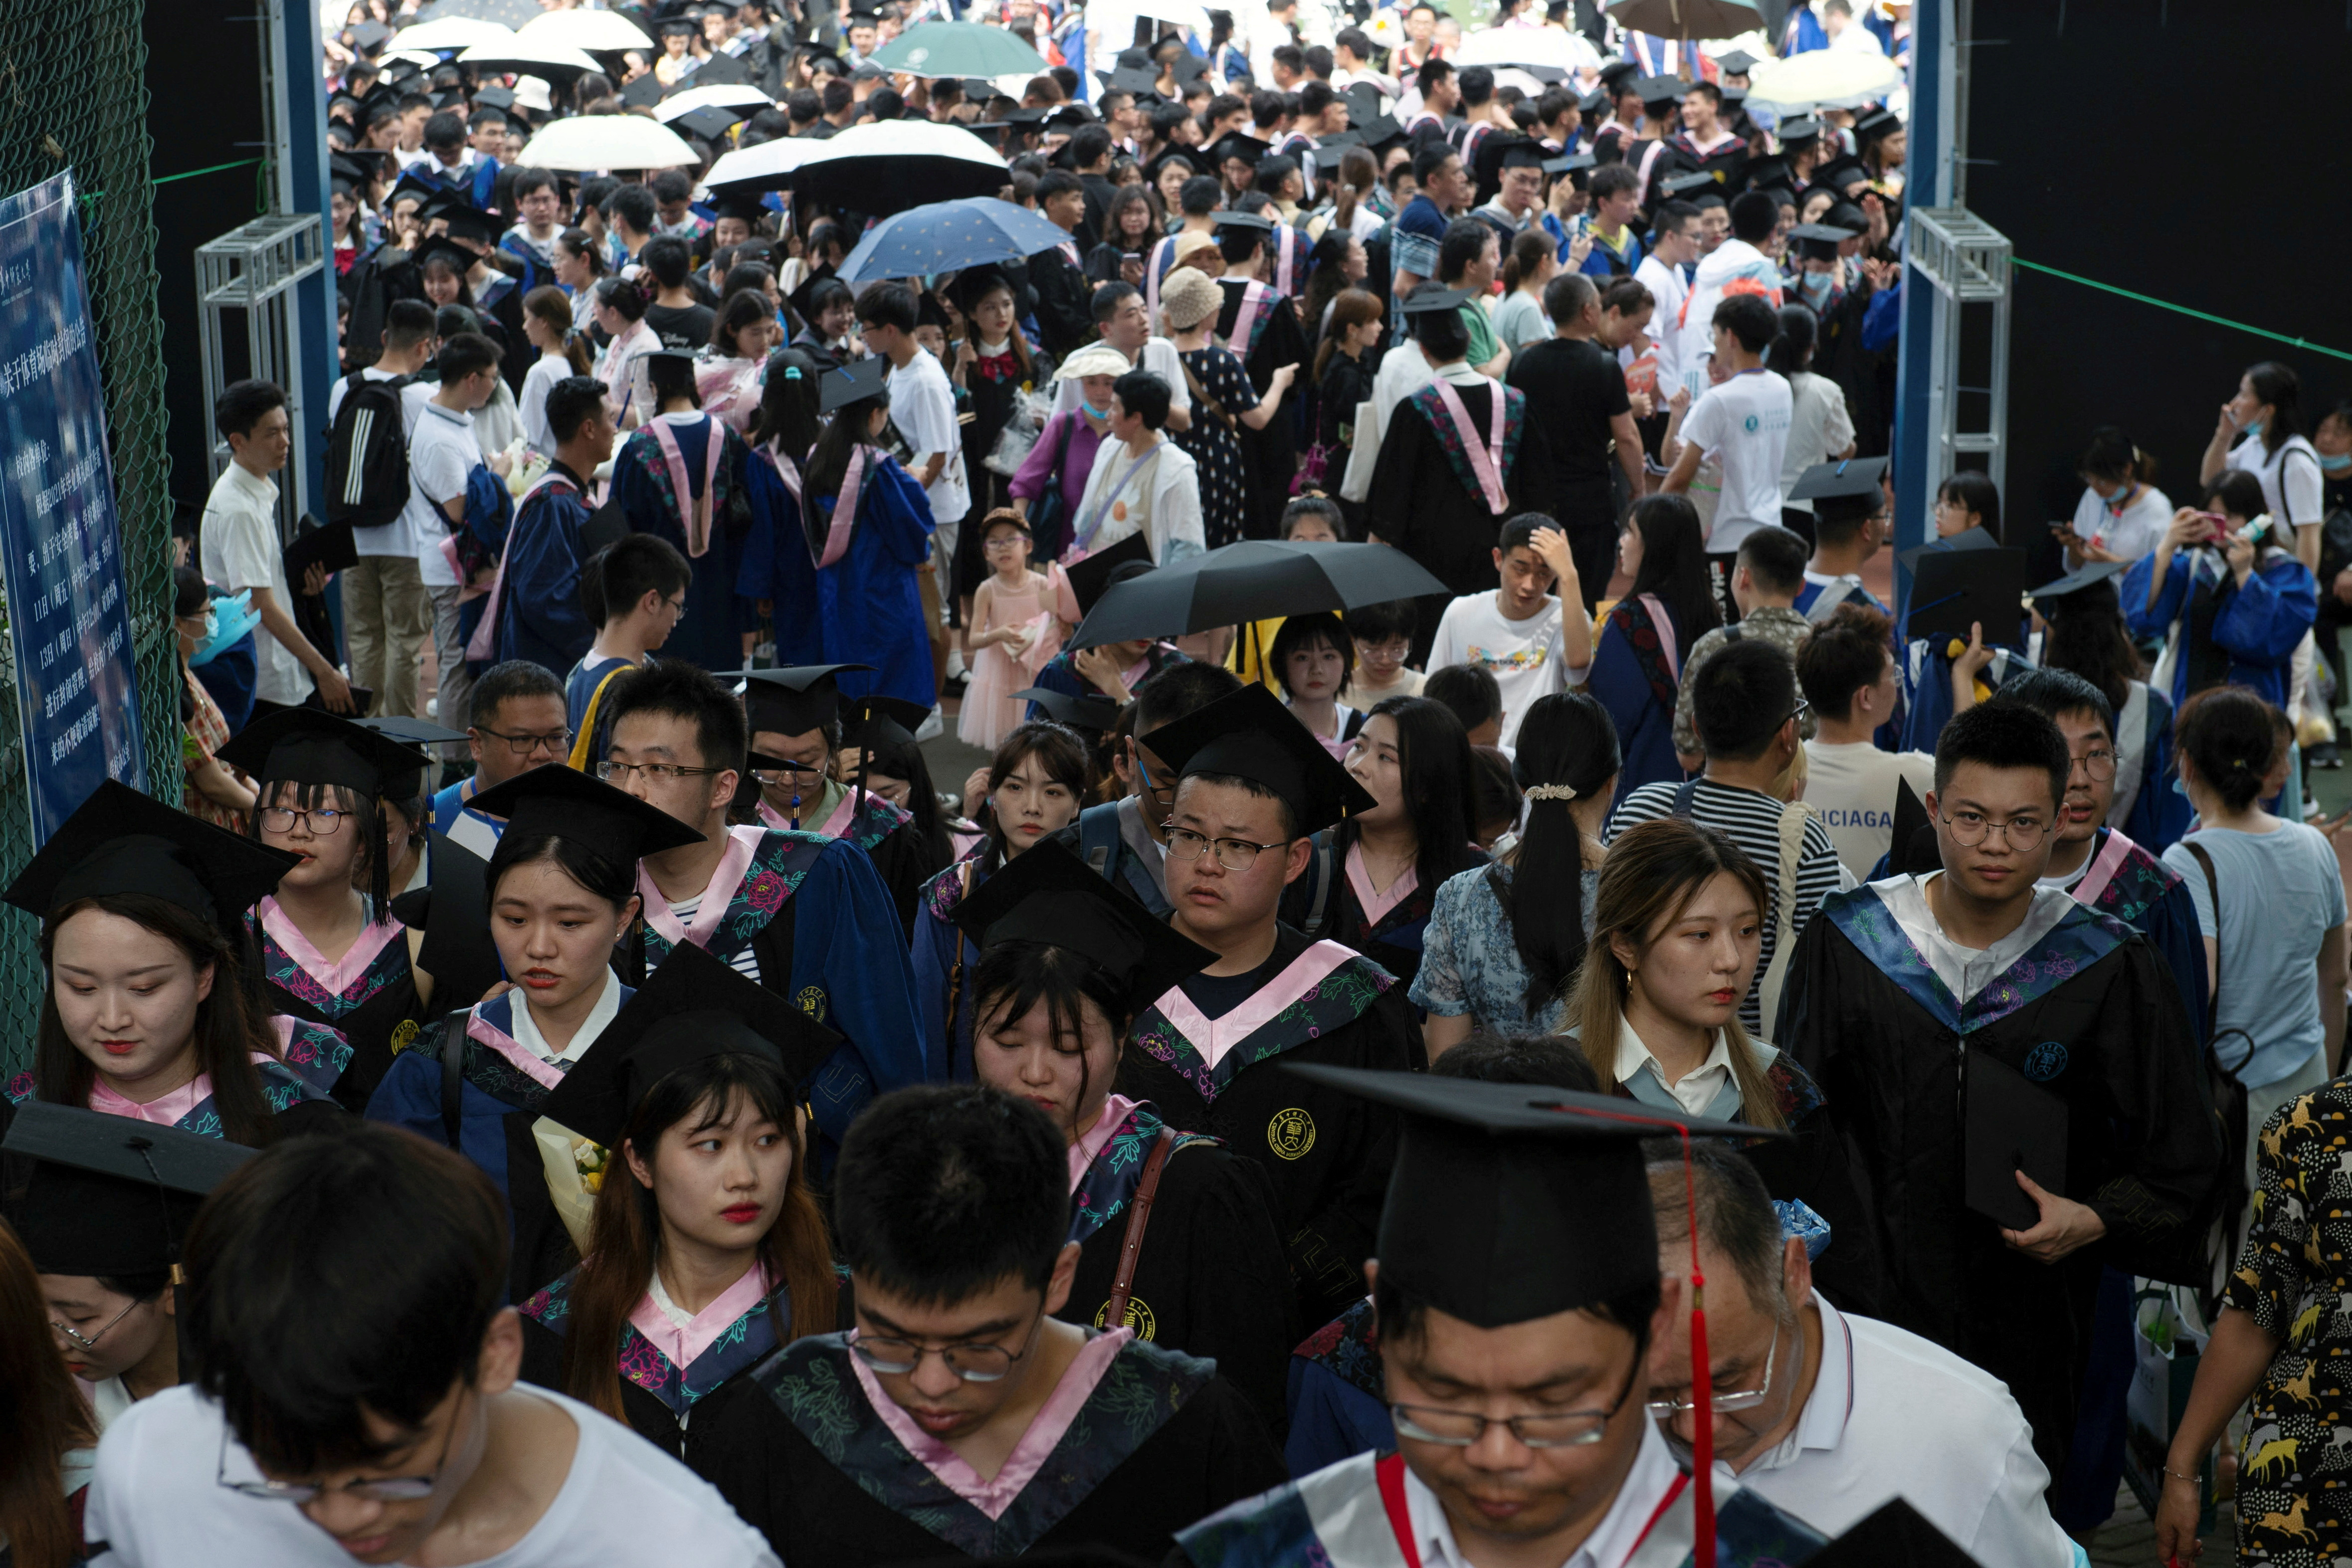 Graduation ceremony at Central China Normal University in Wuhan